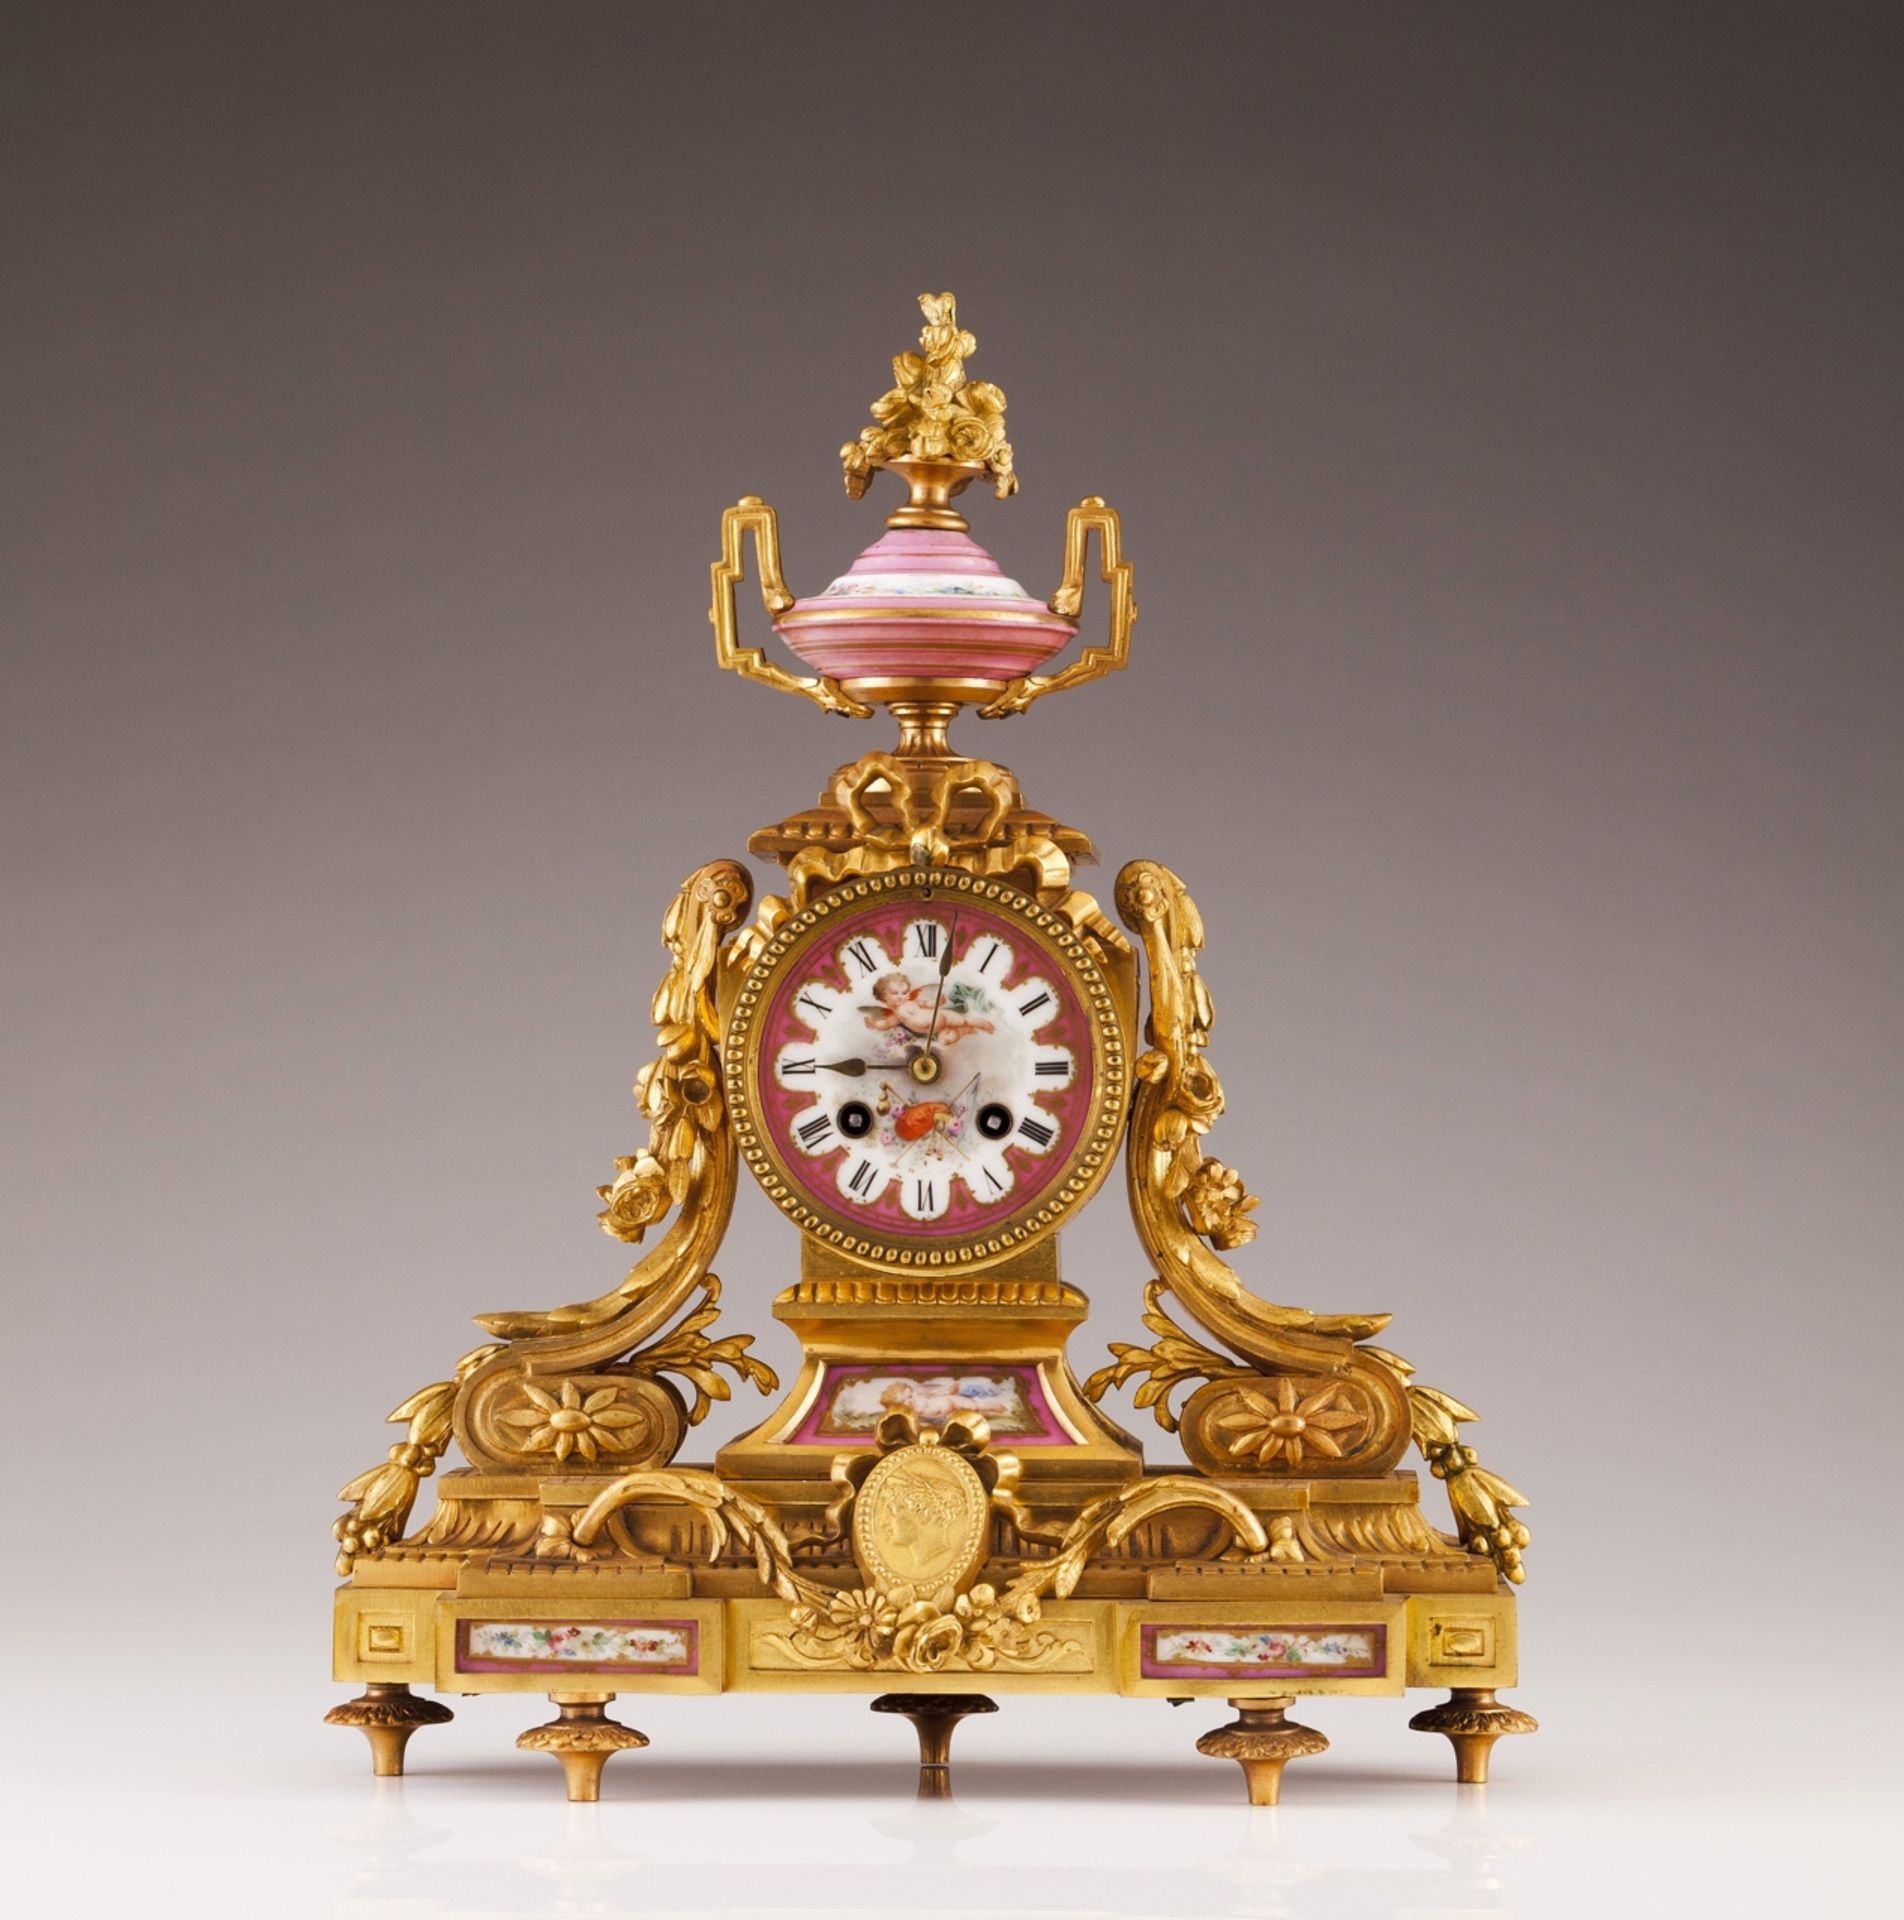 A French late 19th, early 20th century table clock  Gilt bronze d'art  French porcelain plaques